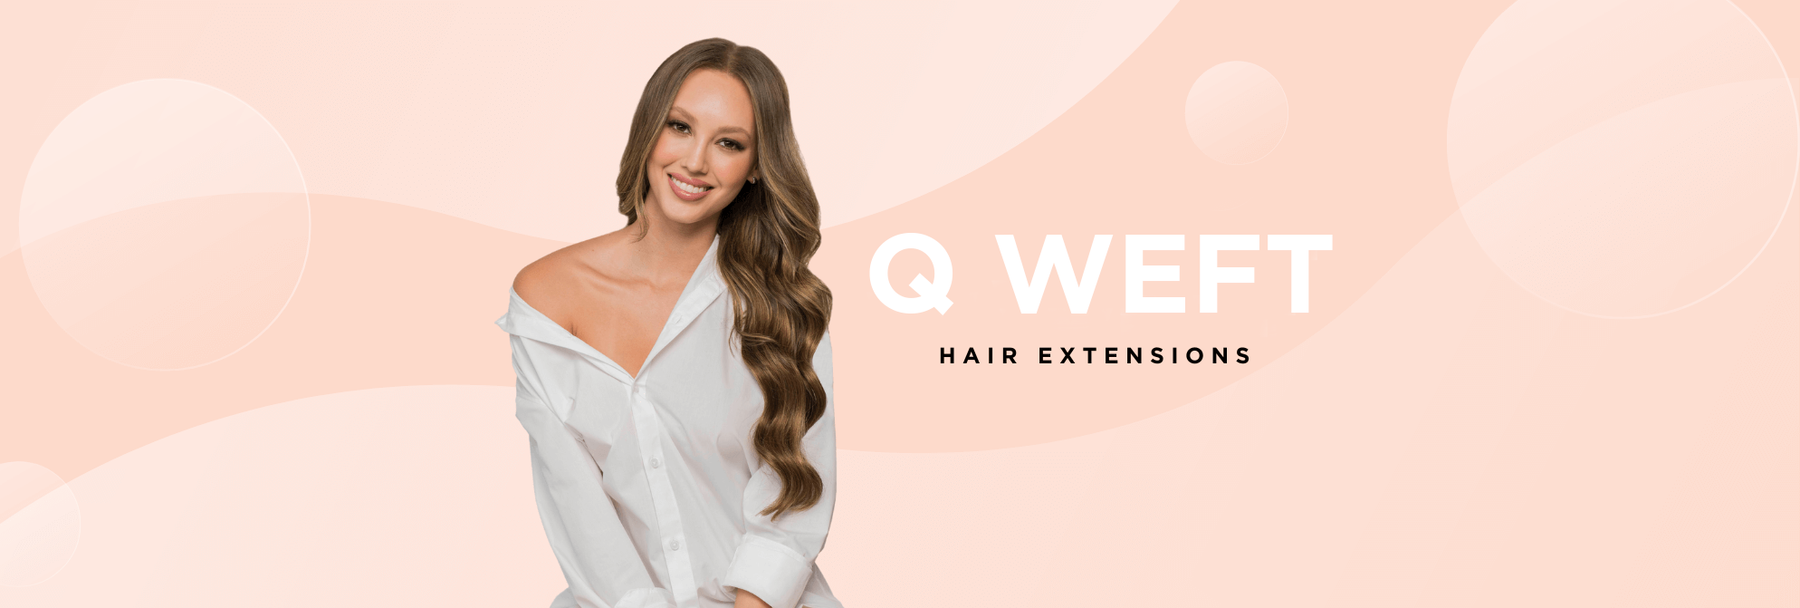 Aqua Q Weft Hair Extension System for Proessionals Only